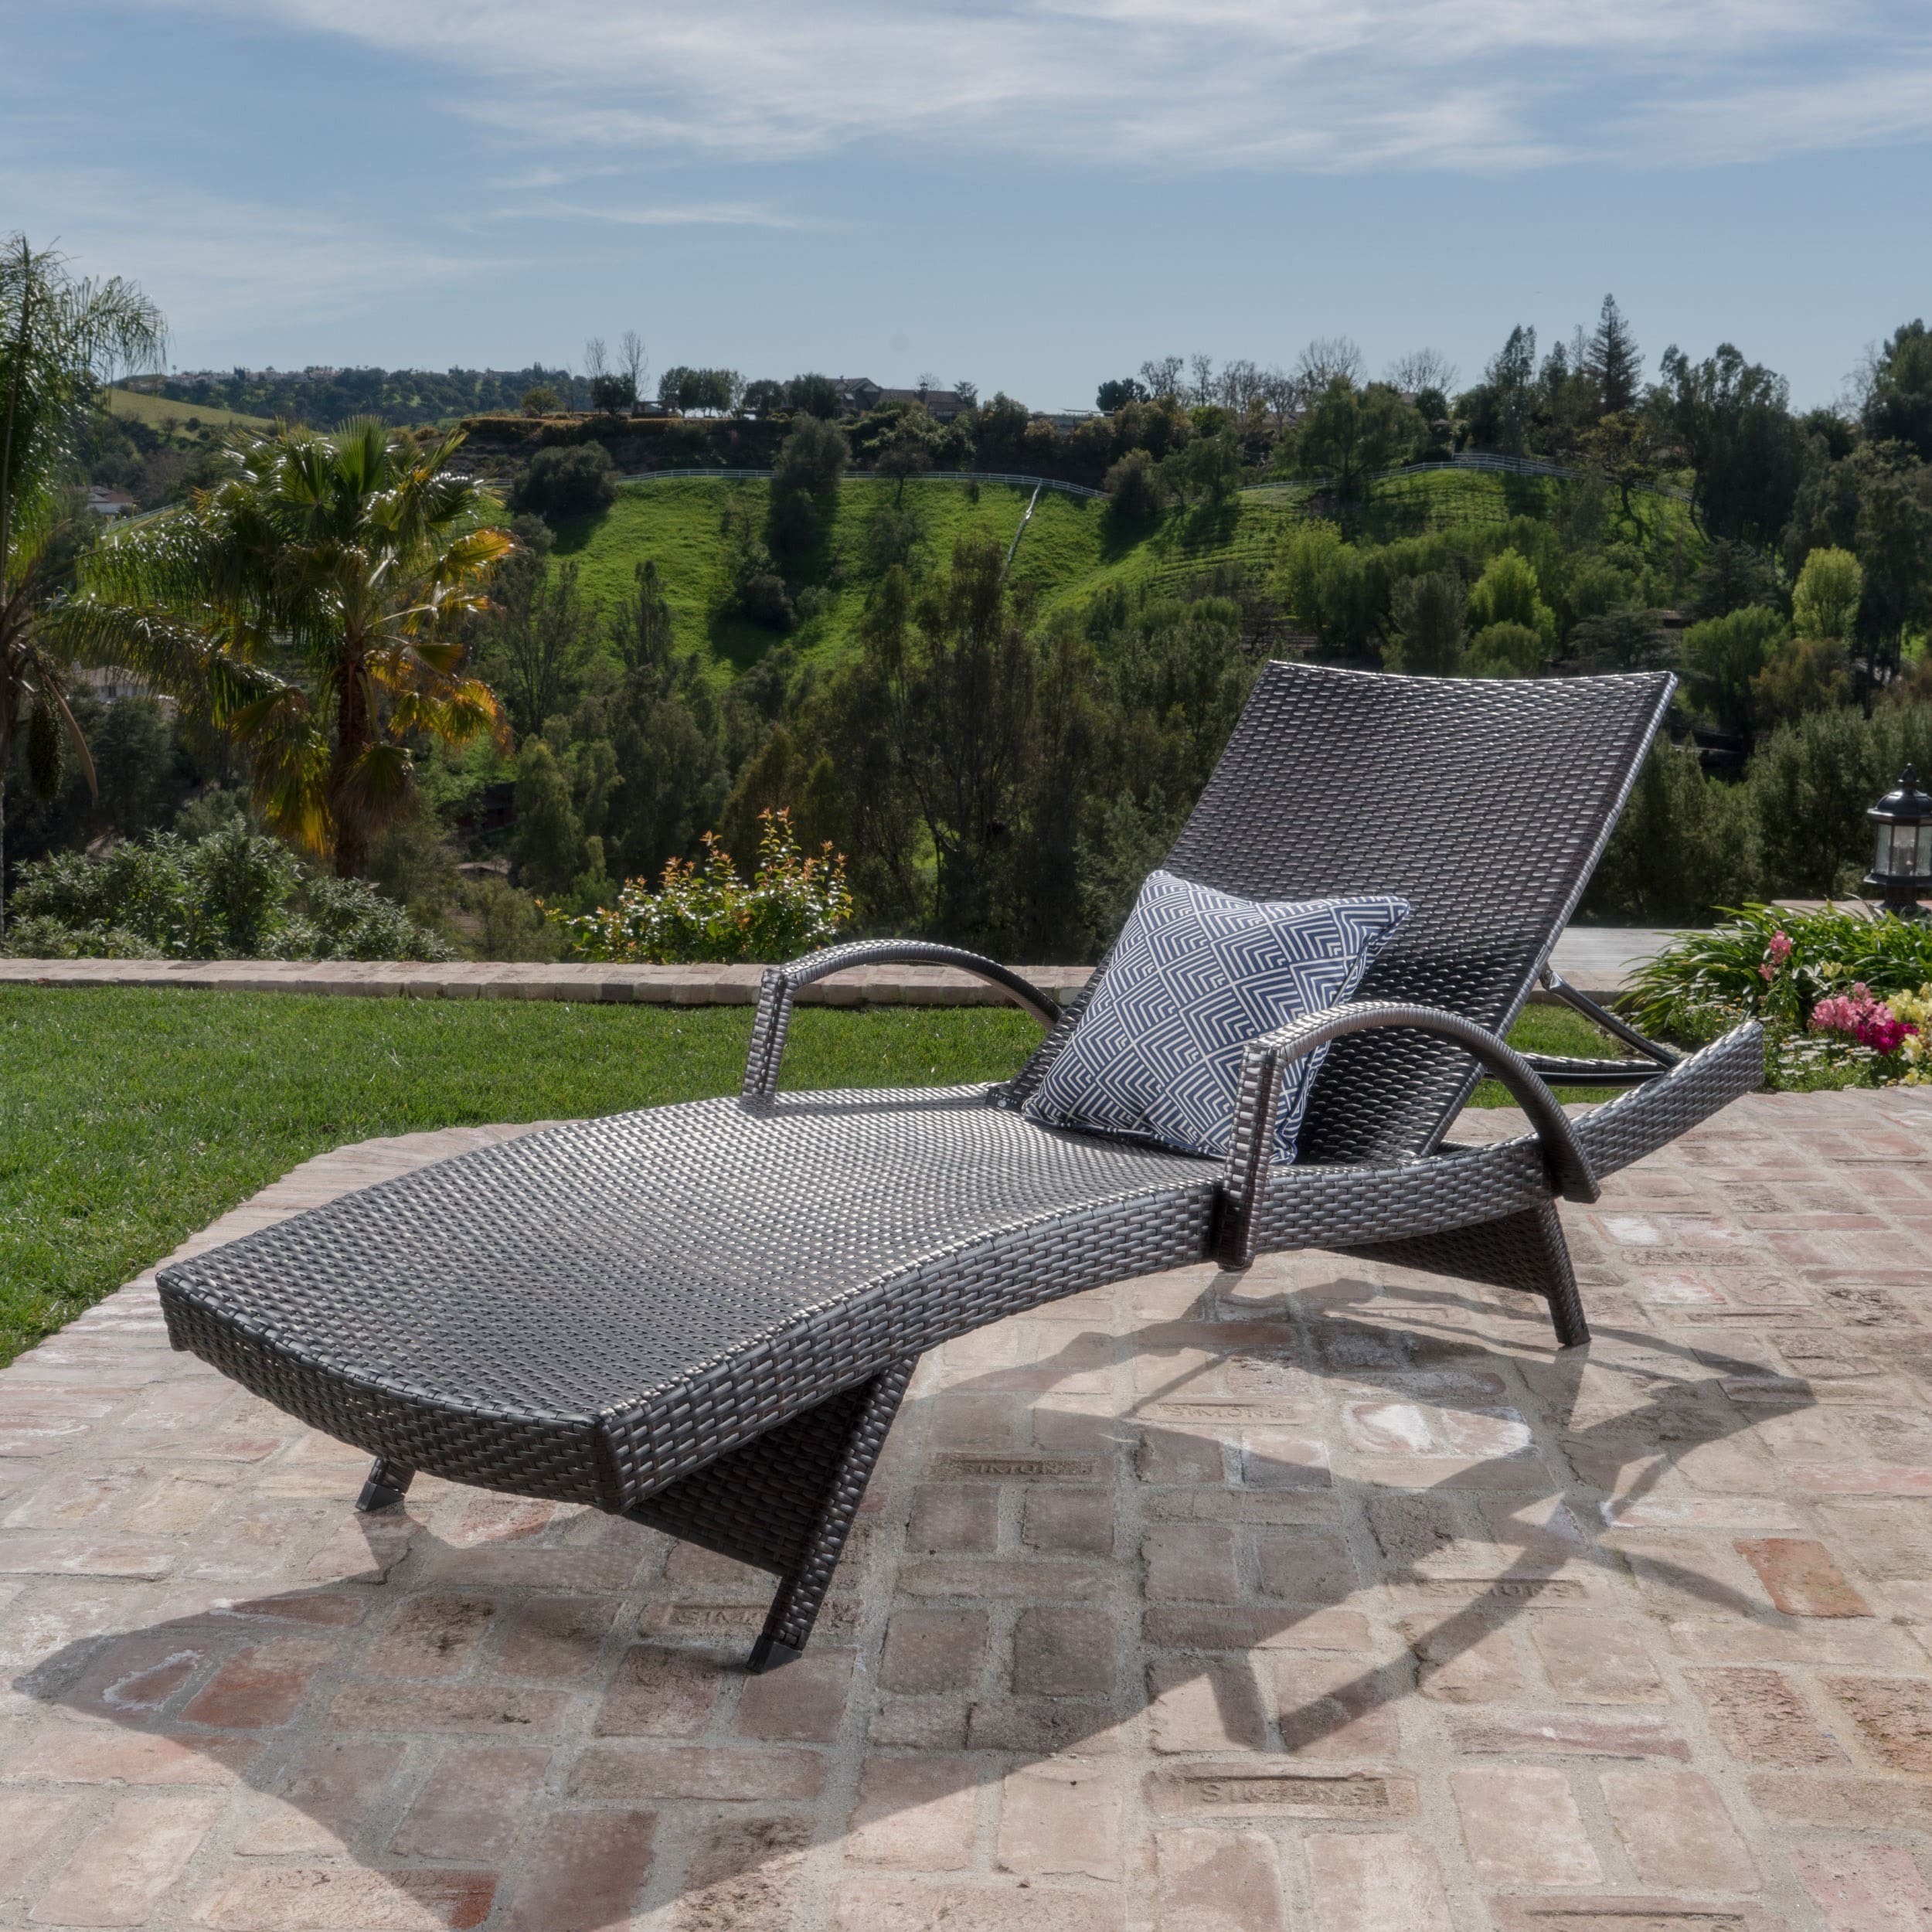 Buy Wicker Outdoor Chaise Lounges Online At Overstockcom Our Best